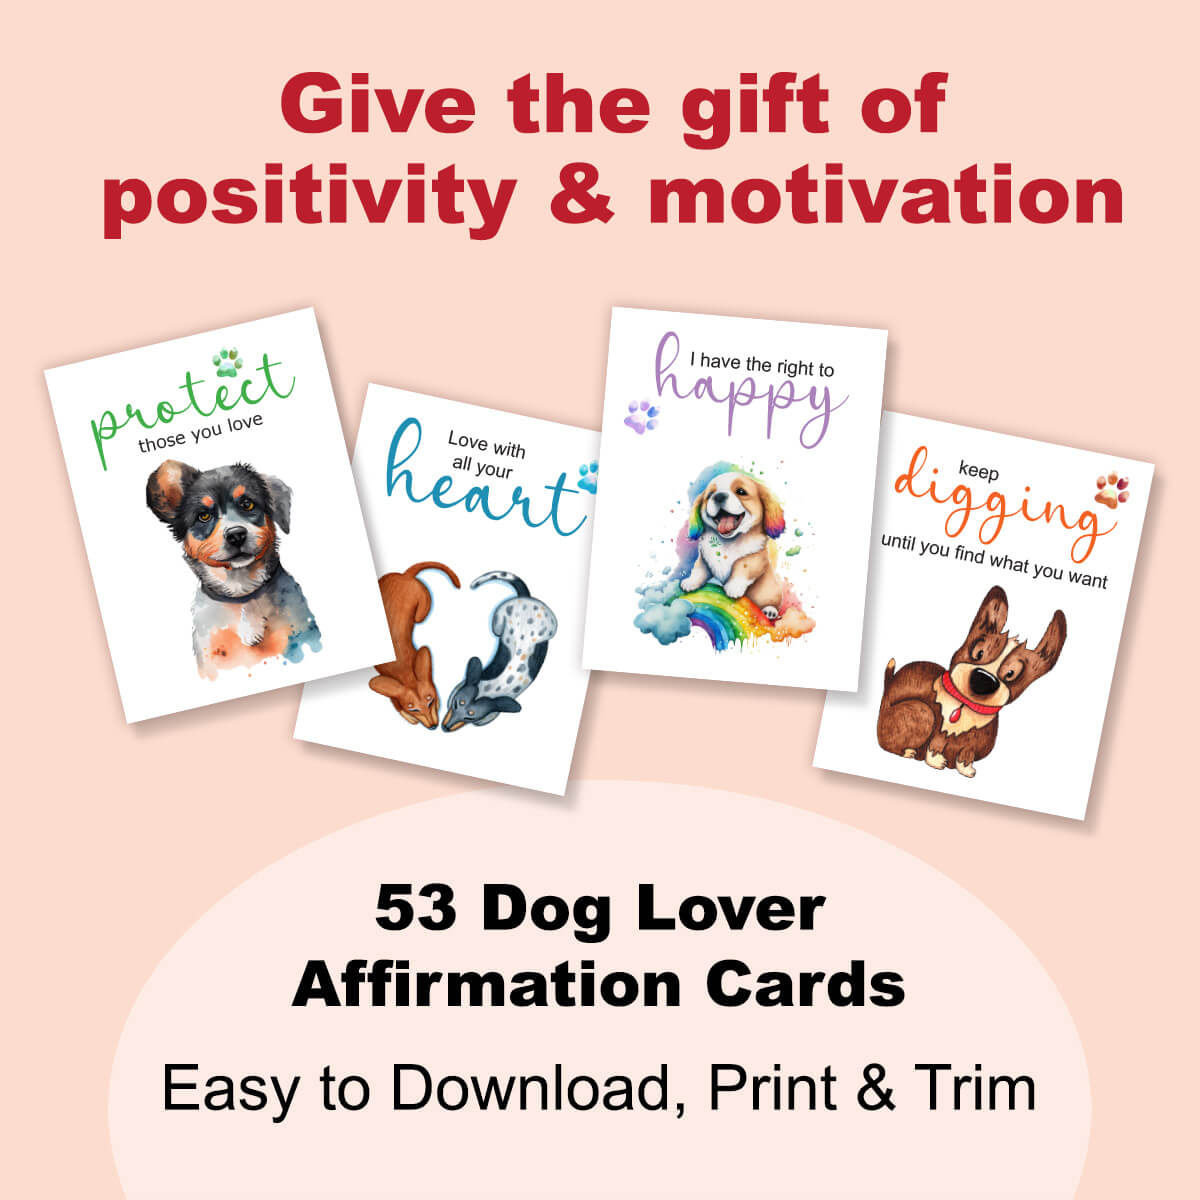 give the gift of positivity and motivation, easy to download, print & trim